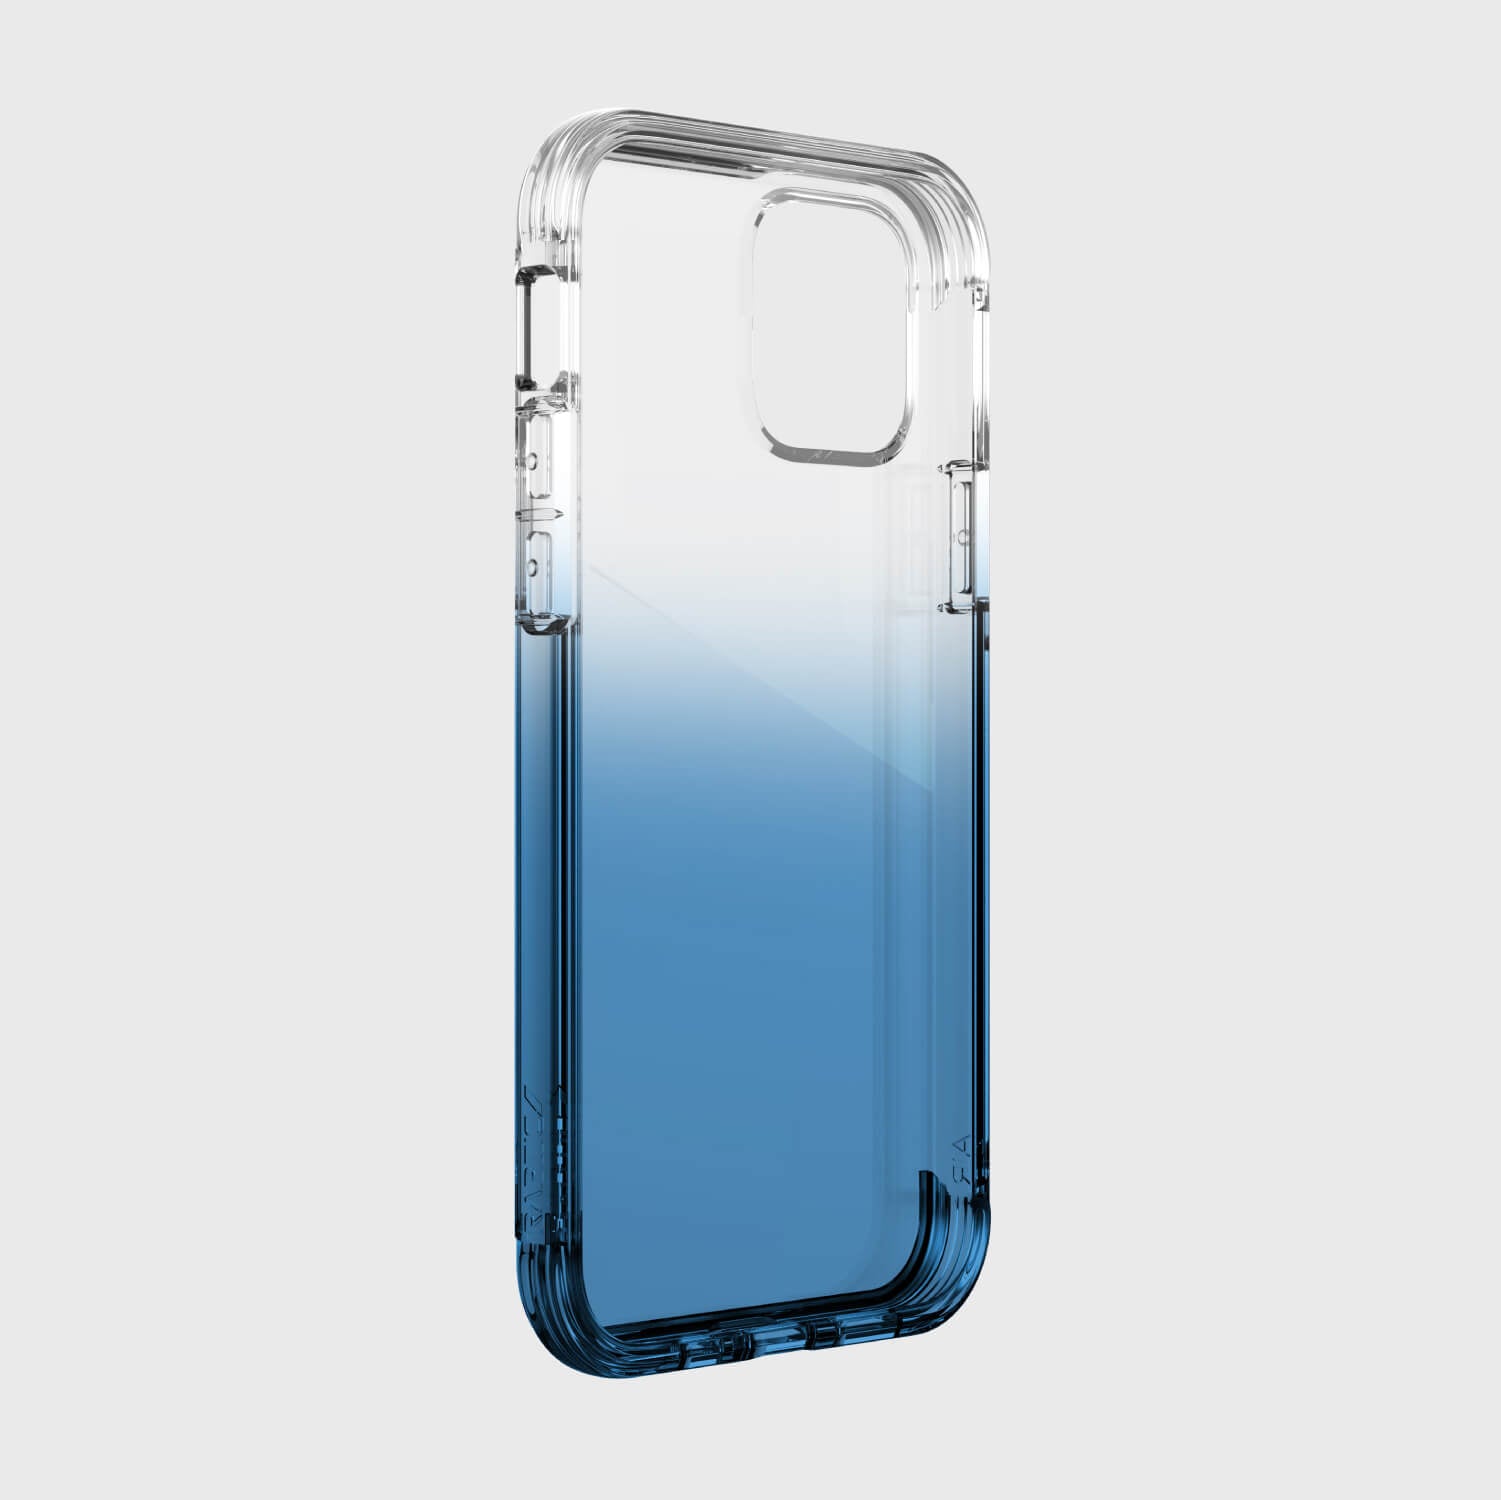 A blue Raptic Air iPhone 12 Pro Max case offers wireless charging compatibility and 4-metre drop protection on a white background.